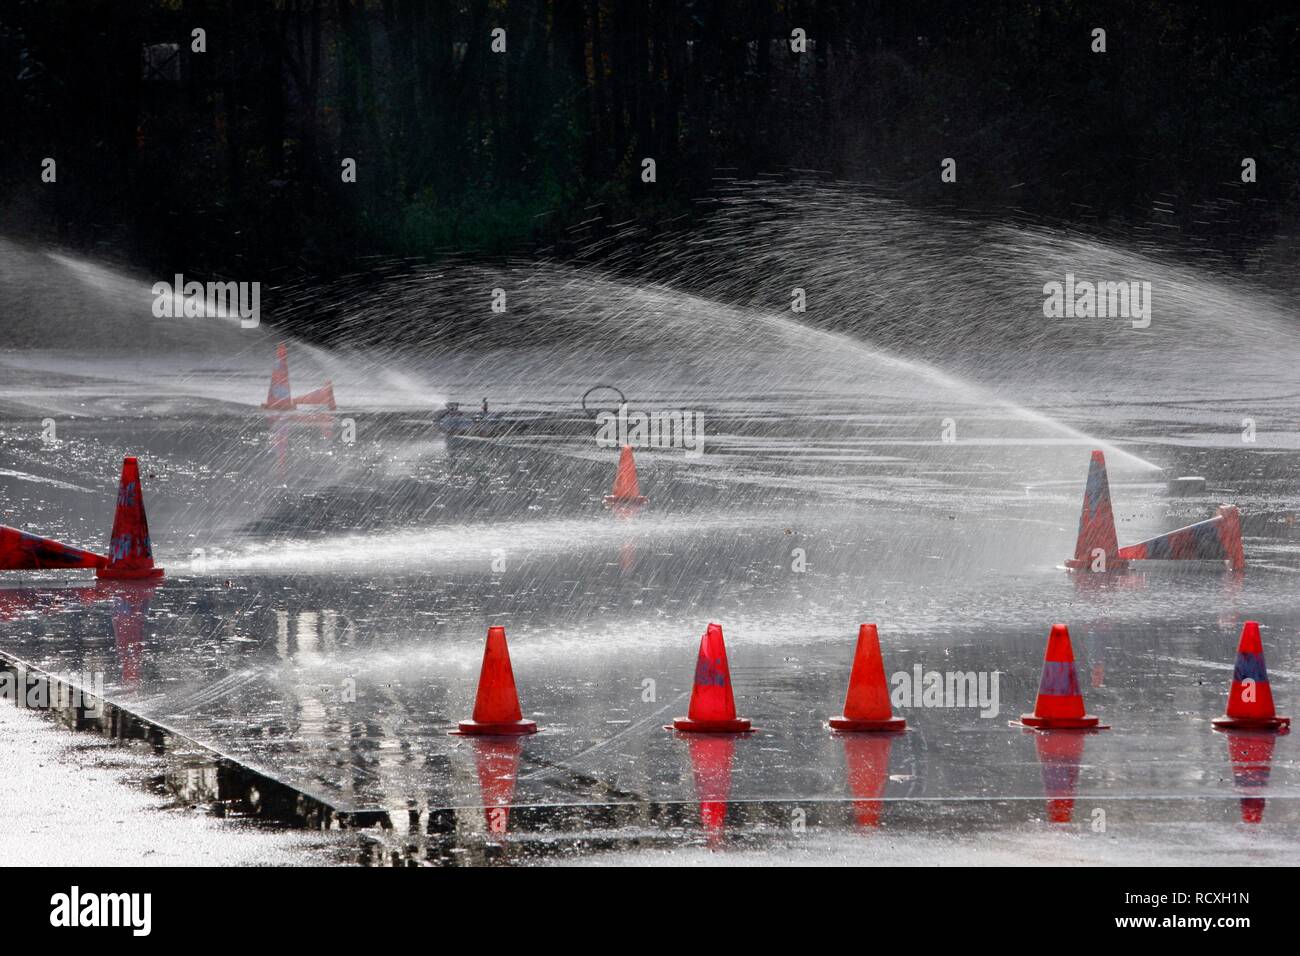 Artificial rainfall on a test route for drivers to test brakes on a wet surface, evasion movements and emergency stops Stock Photo